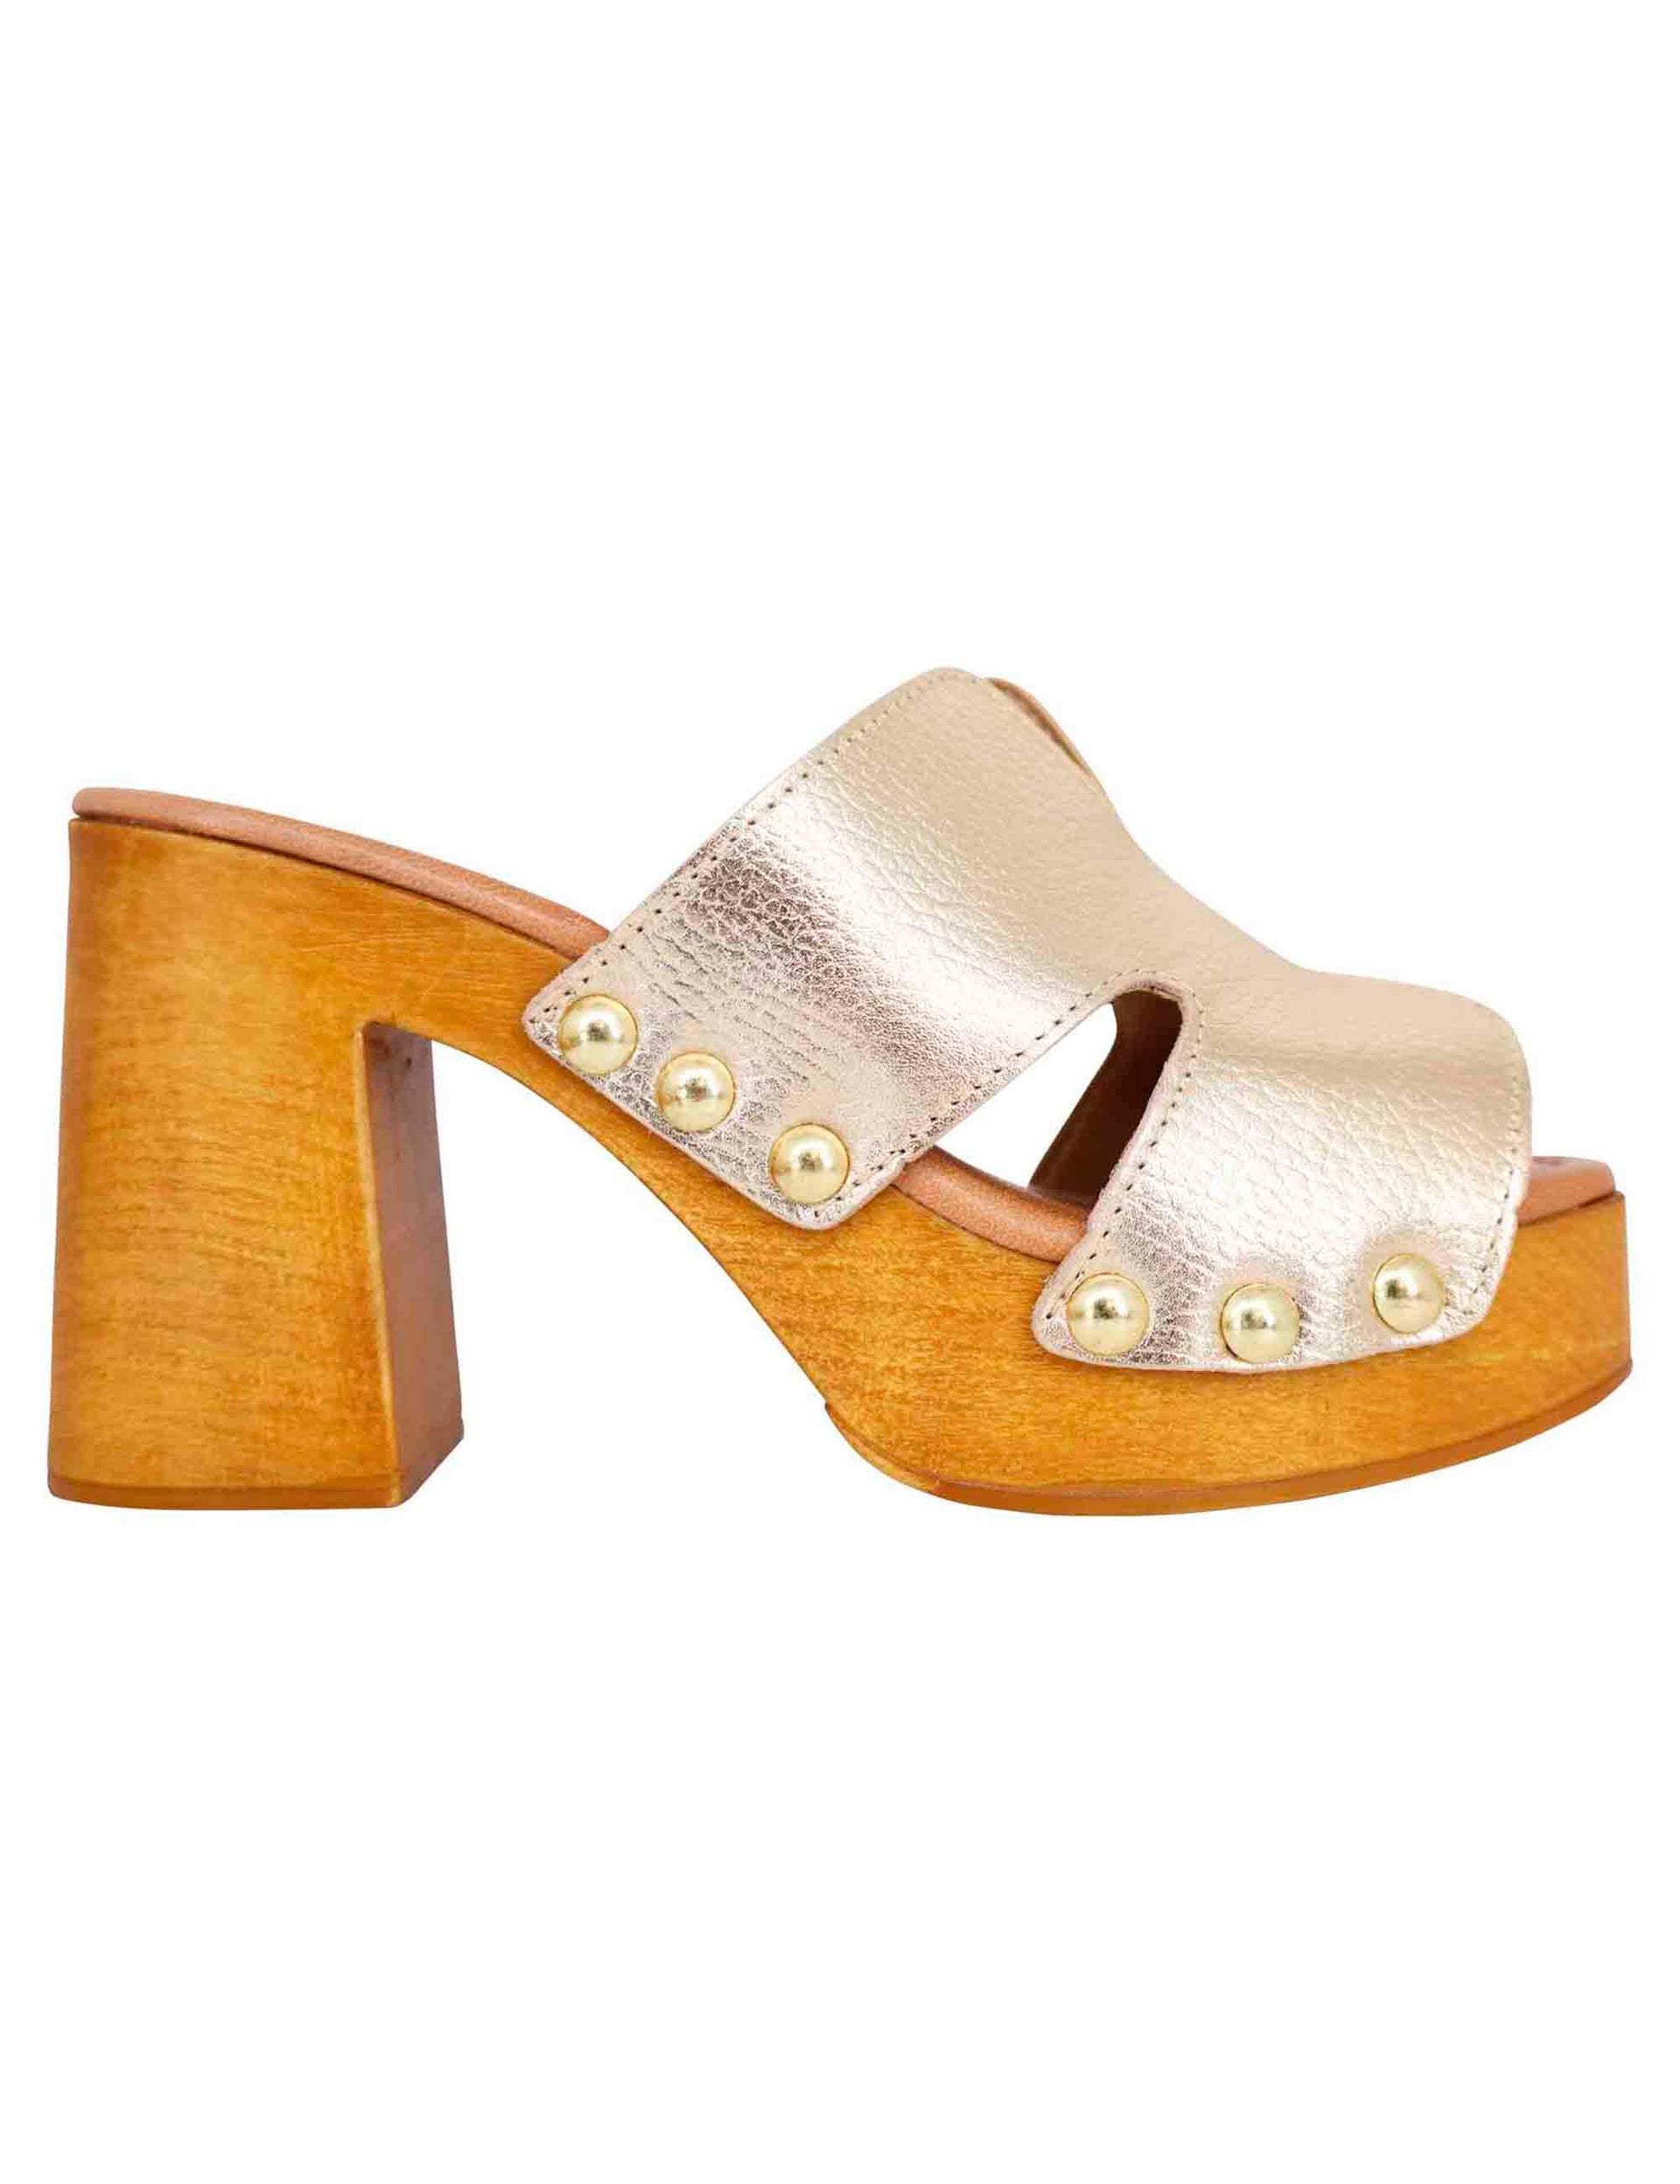 Women's clog sandals in platinum leather with gold buckles and high heel